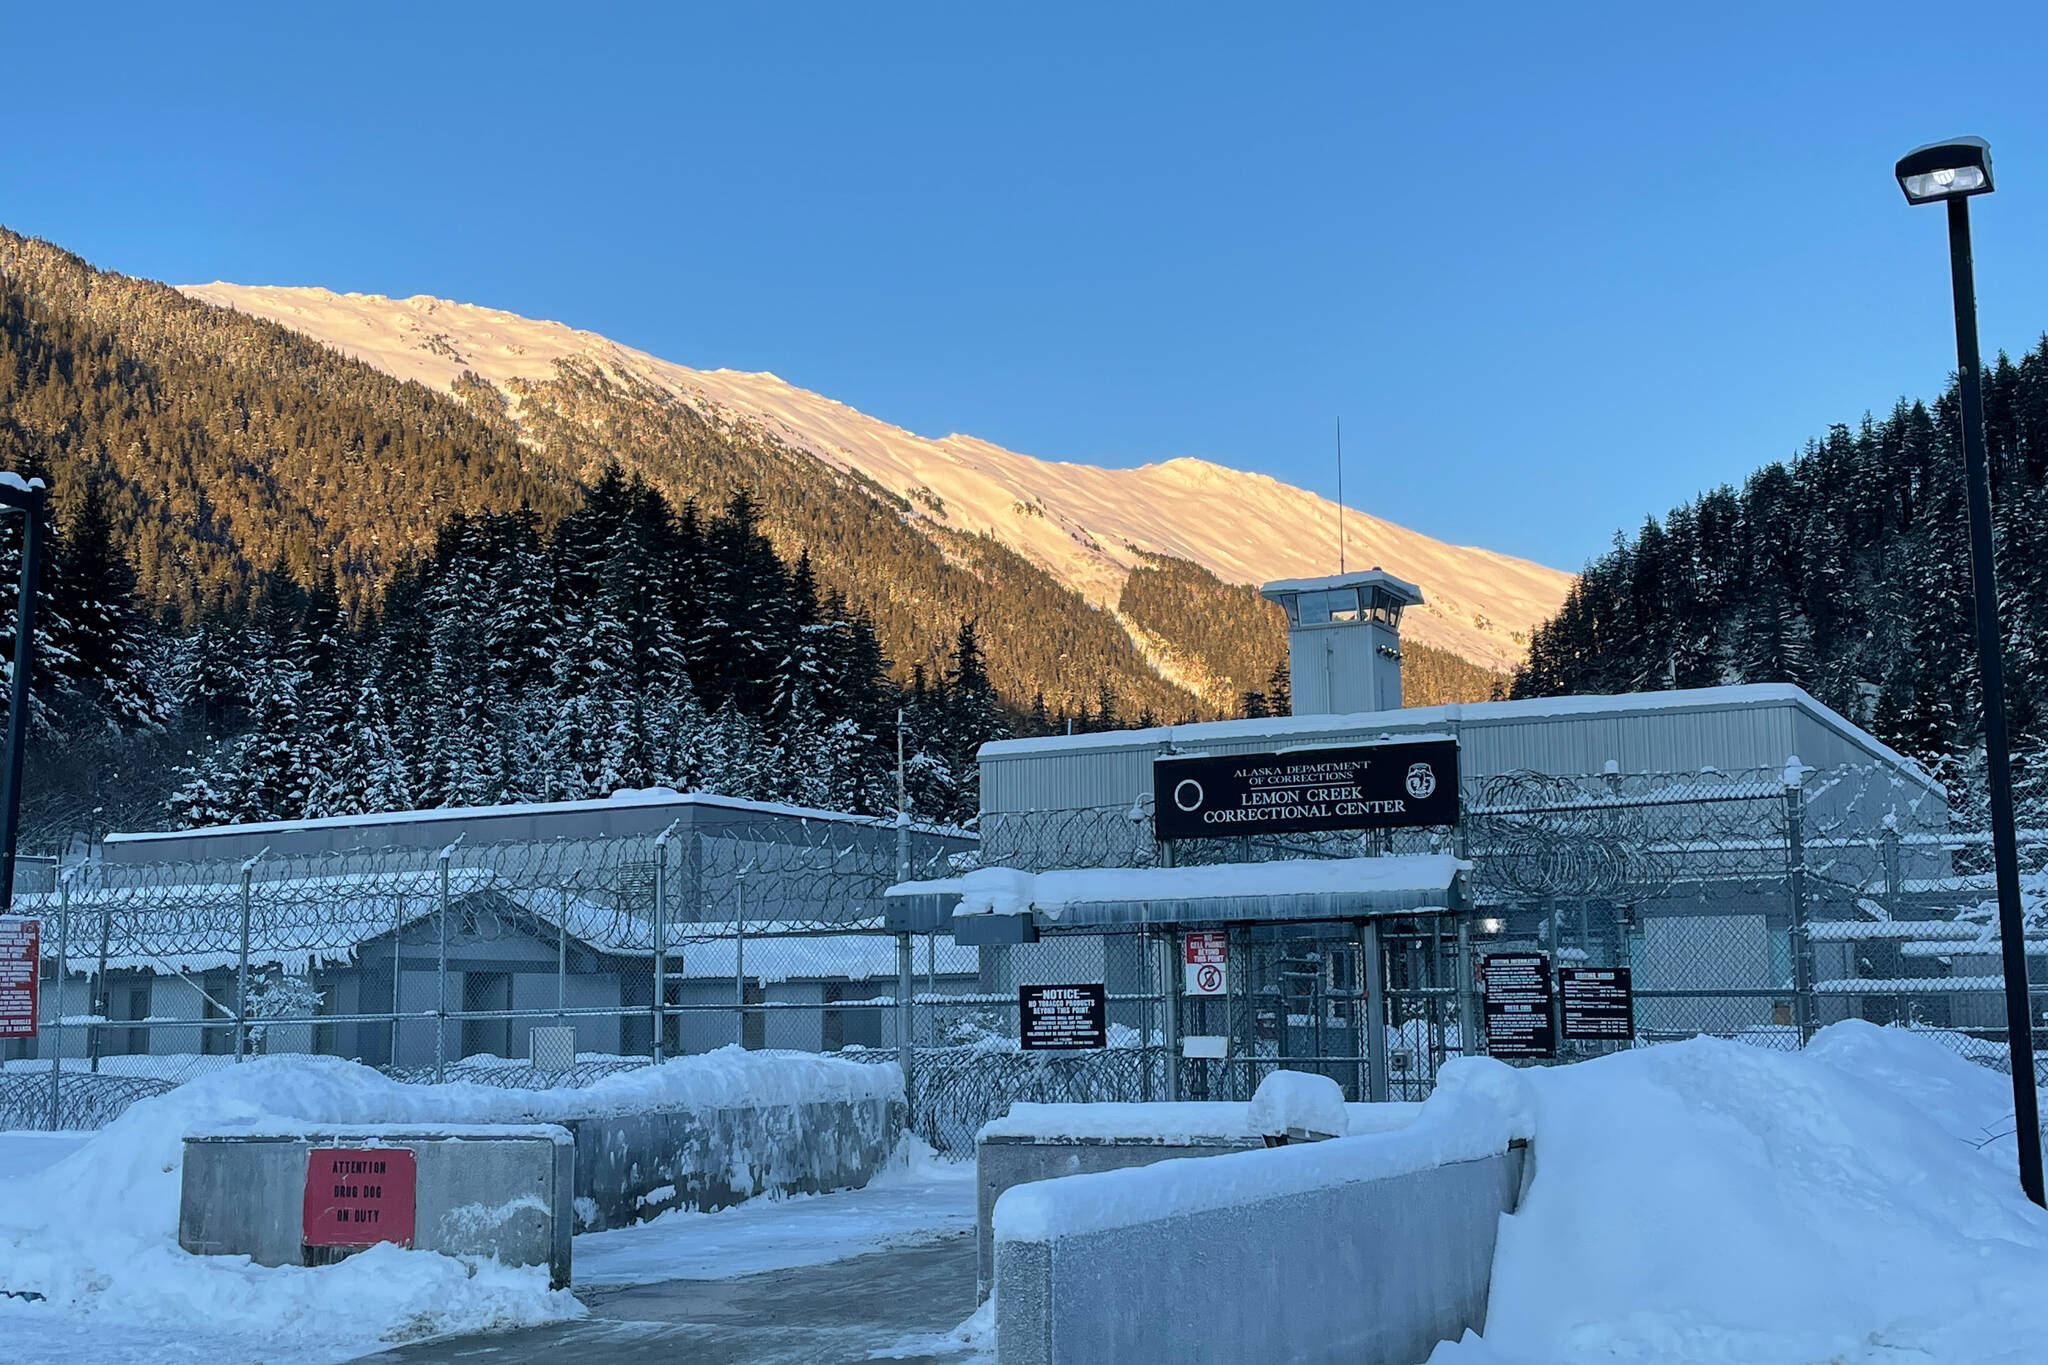 A number of complaints filed against Lemon Creek Correctional Center were investigated by the state ombudsman’s office, resulting in a number of changes in the facility’s operations during the fall and winter of 2020. (Michael S. Lockett / Juneau Empire)